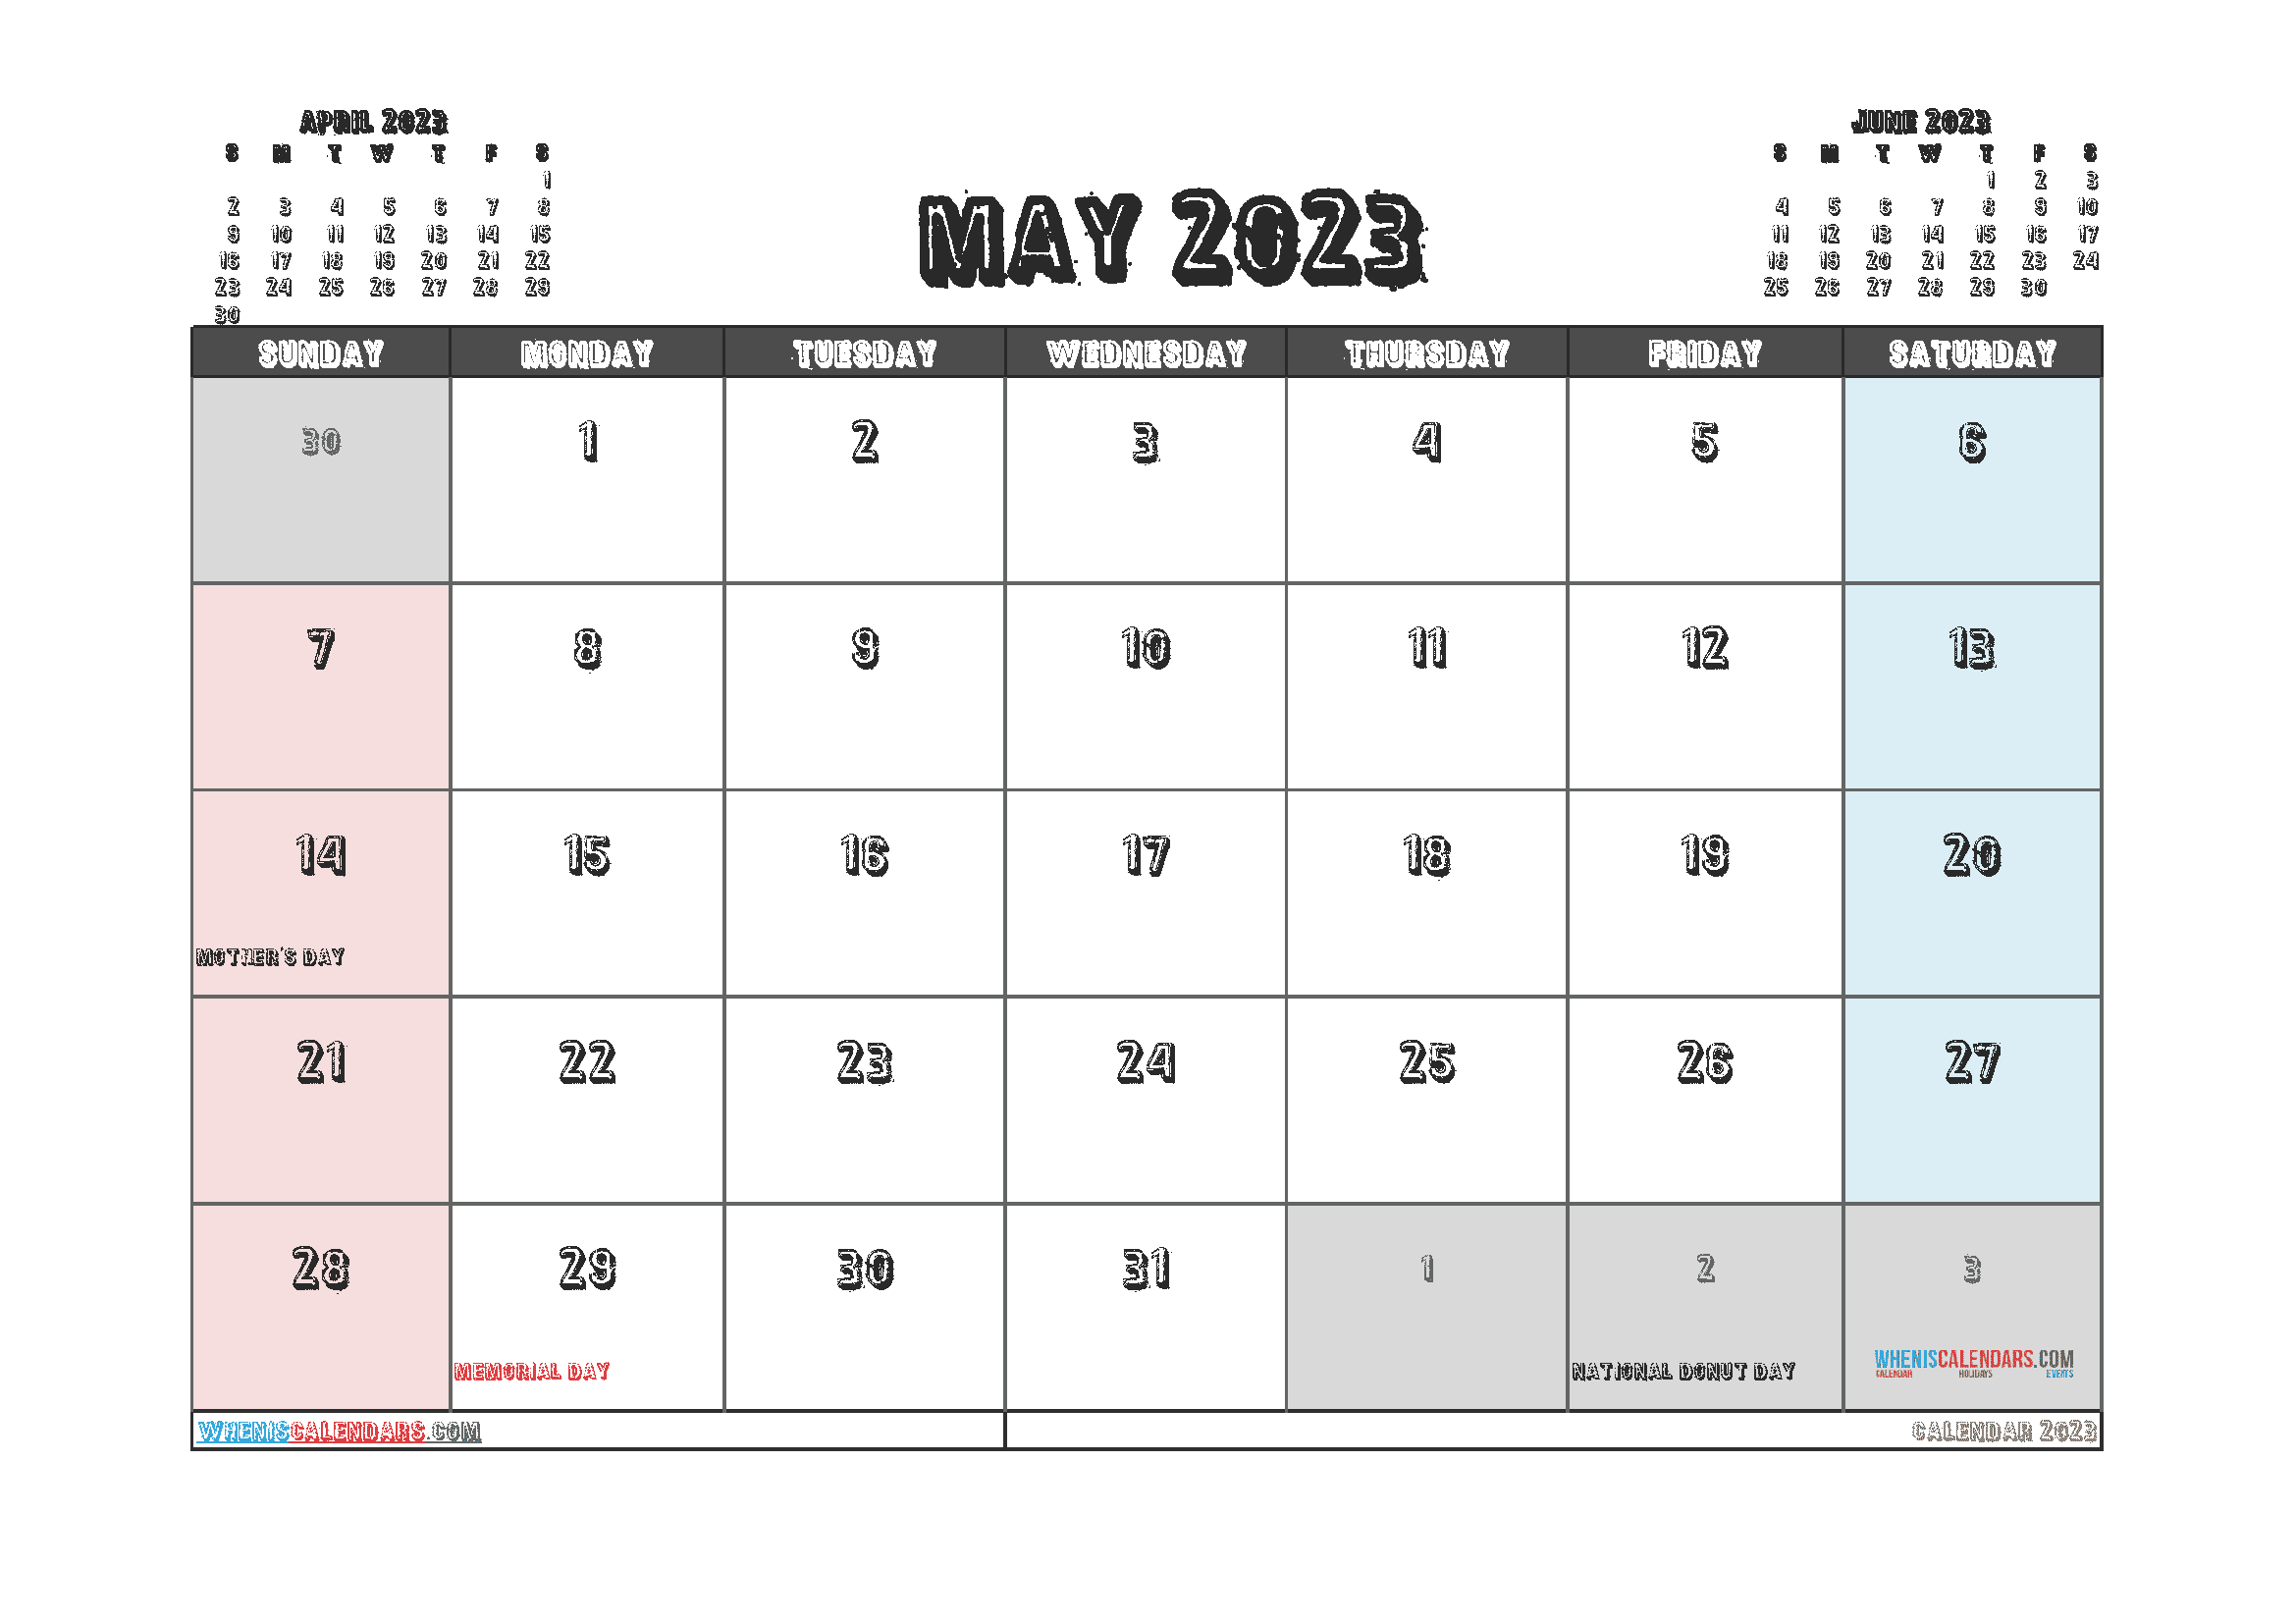 Free Printable Calendar 2023 May with Holidays PDF in Landscape